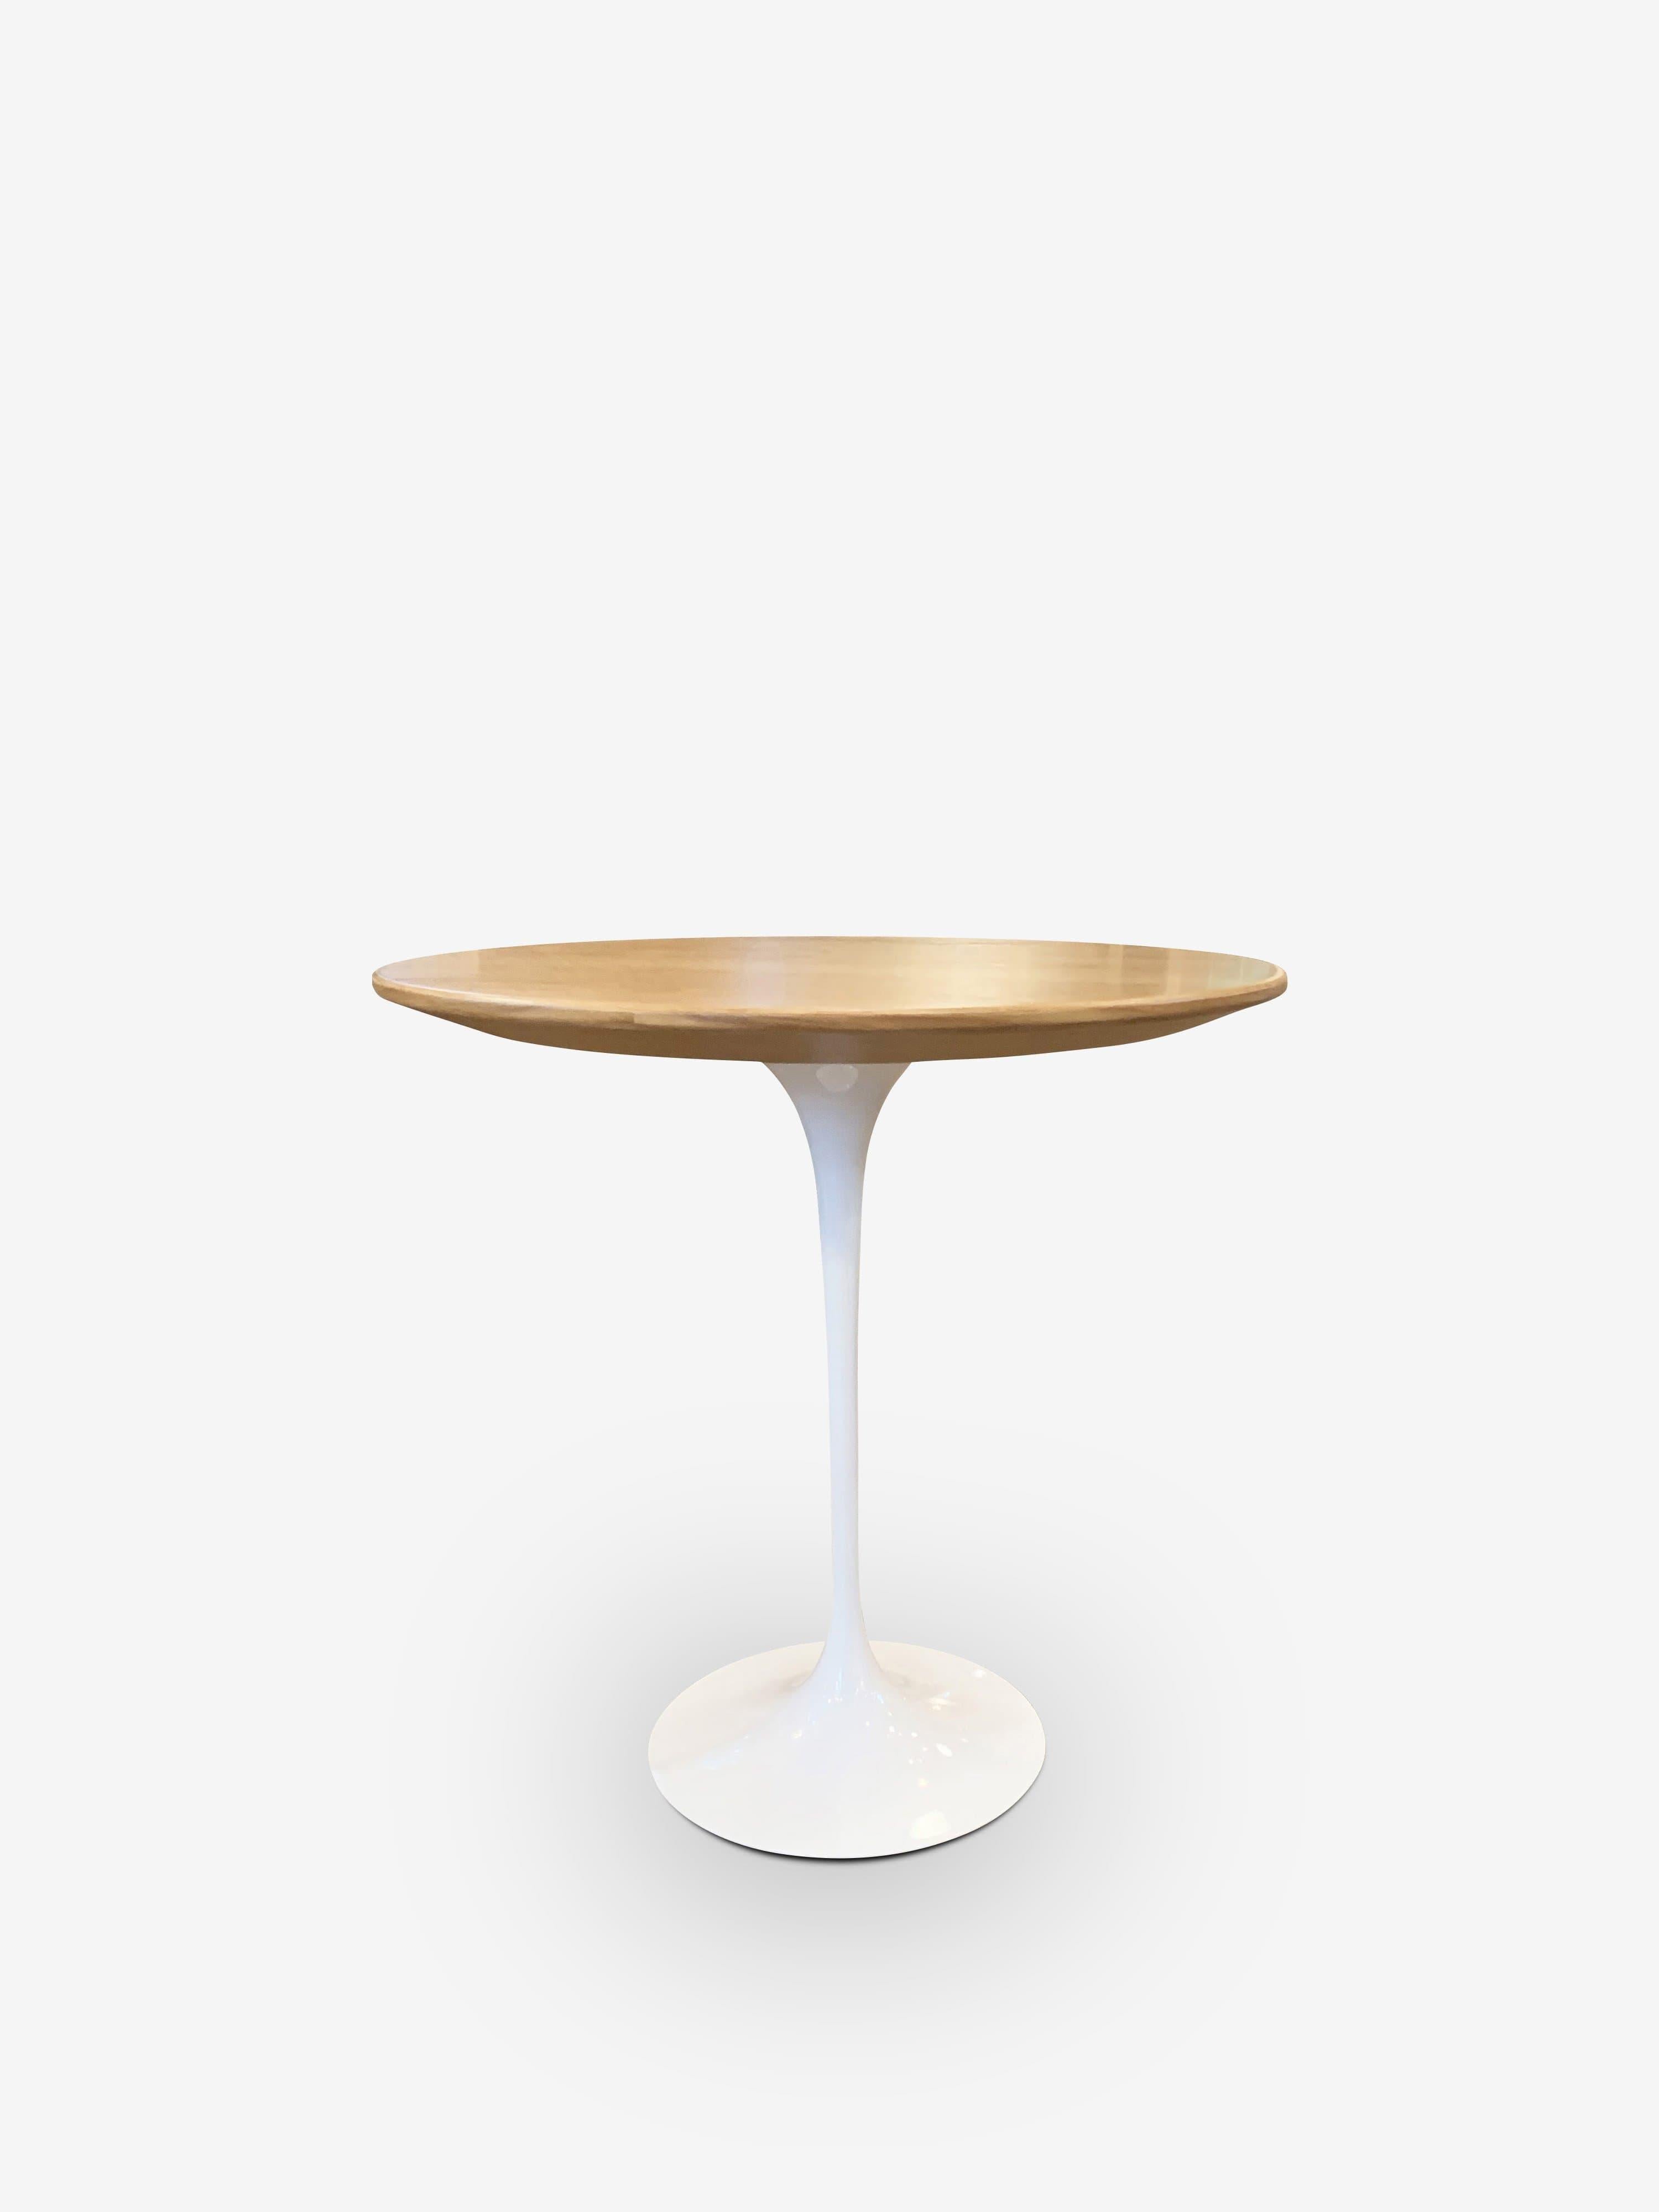 American Eero Saarinen Small Round Table with Oak Top & White Base For Sale